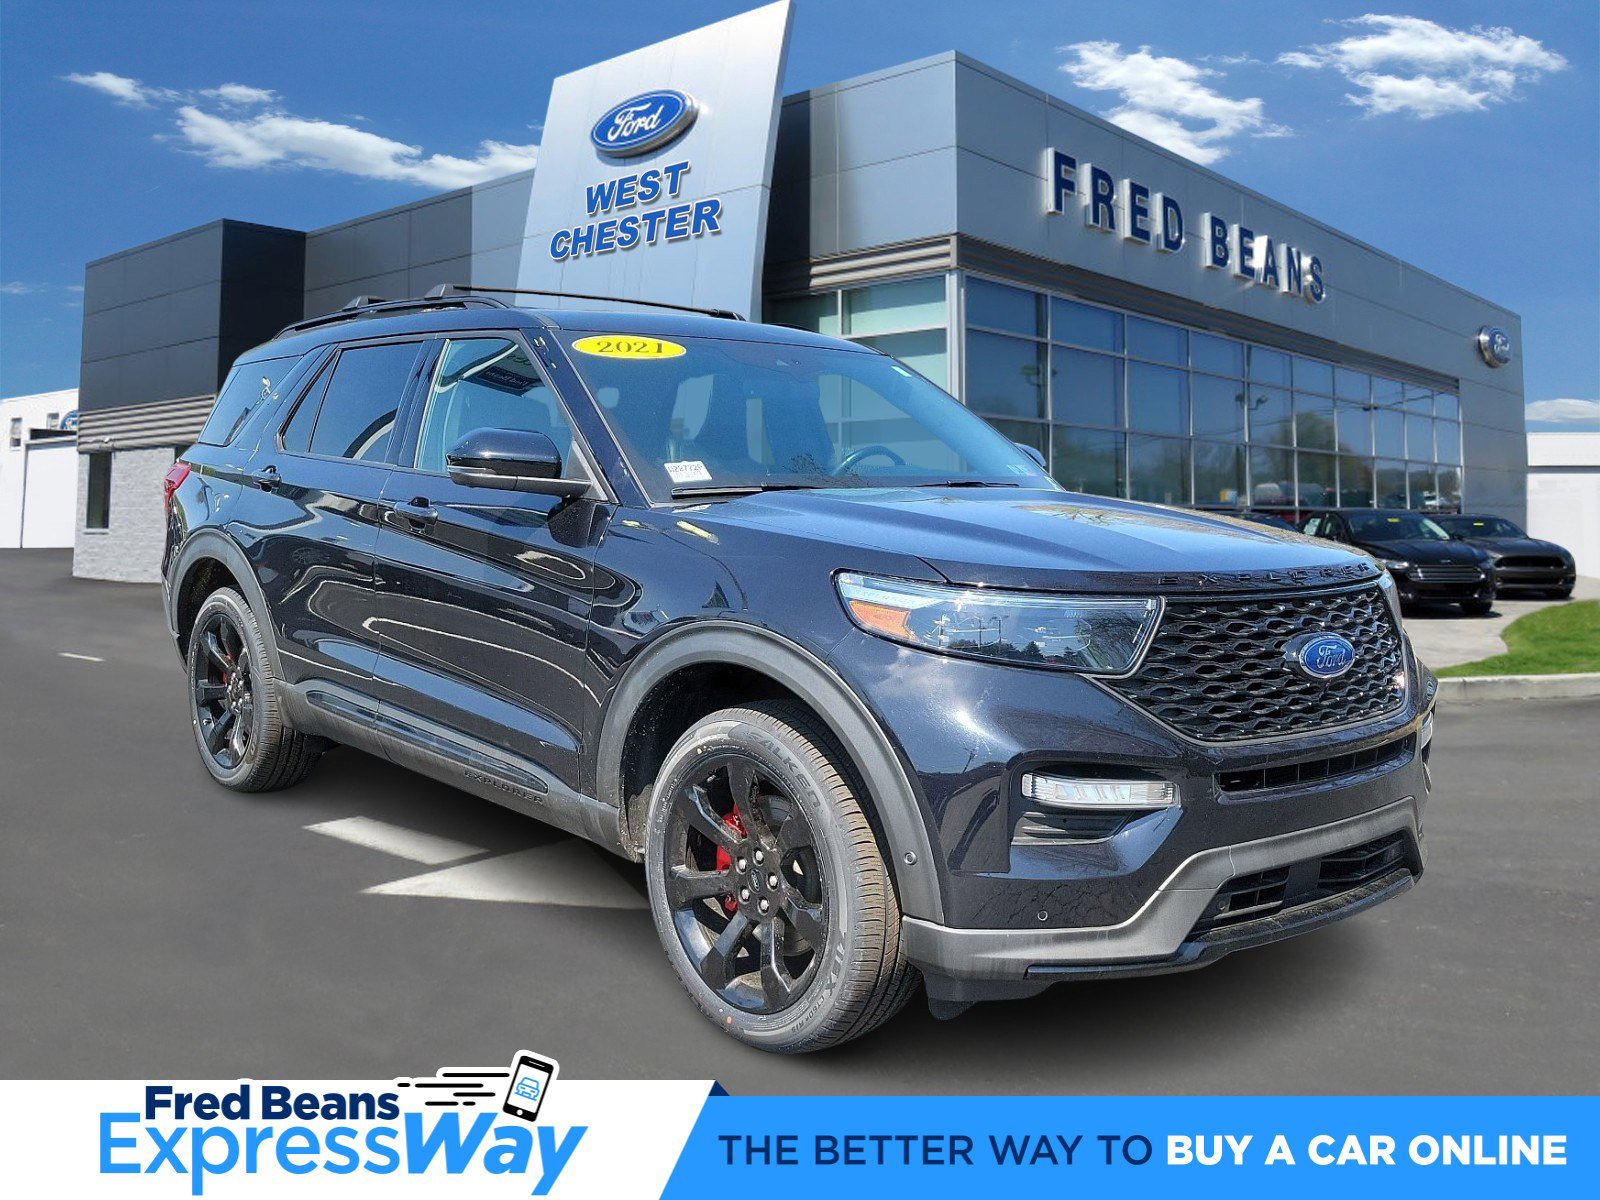 2021 Ford Explorer West Chester PA